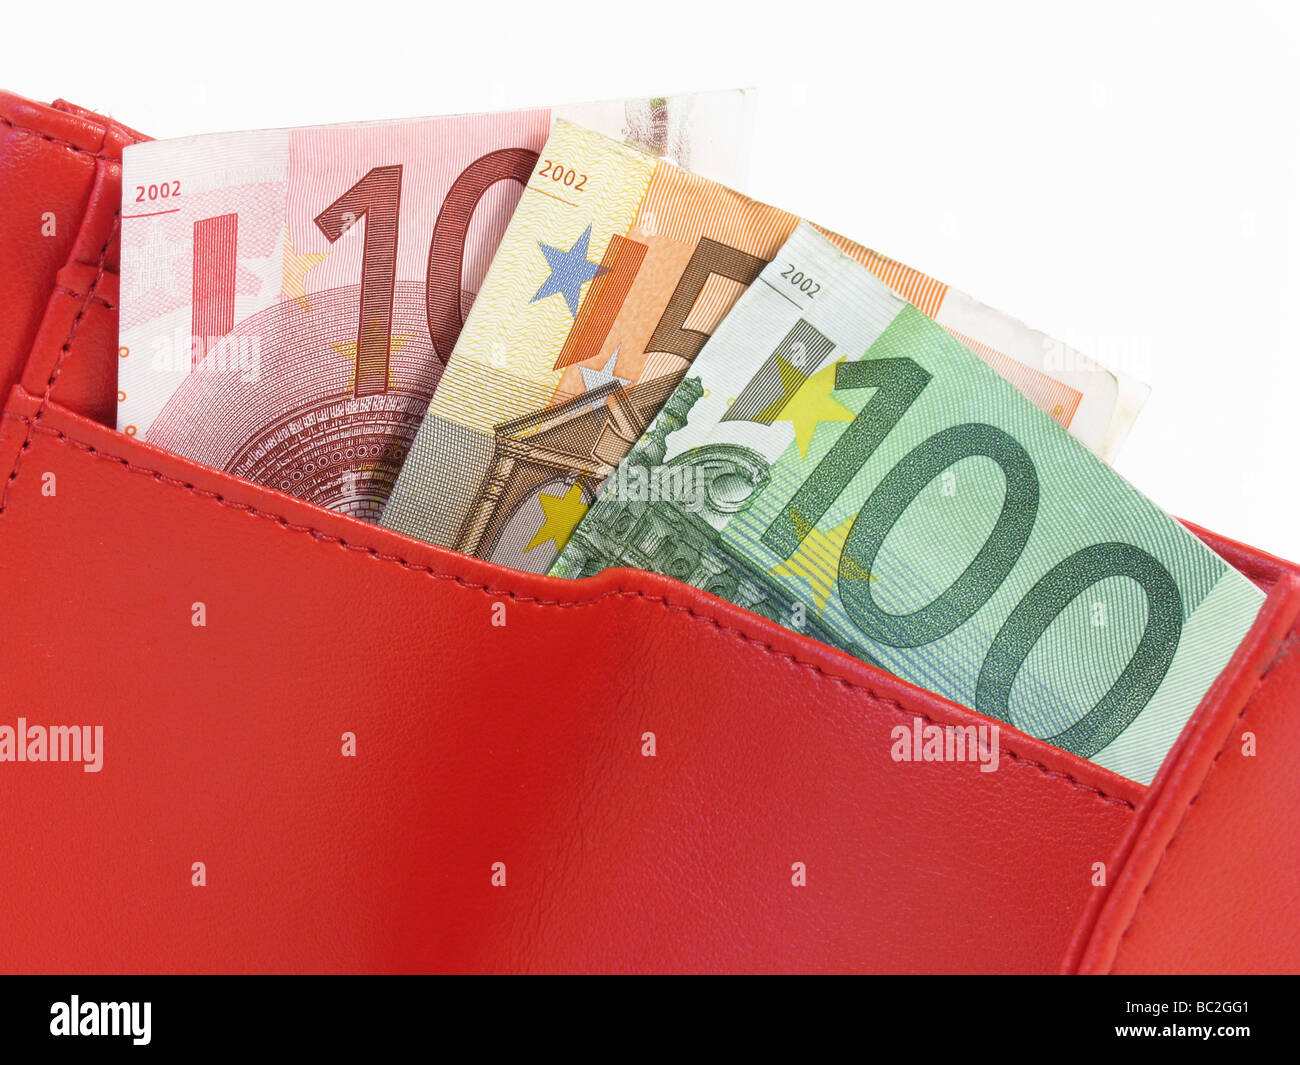 red leather wallet with euros Stock Photo